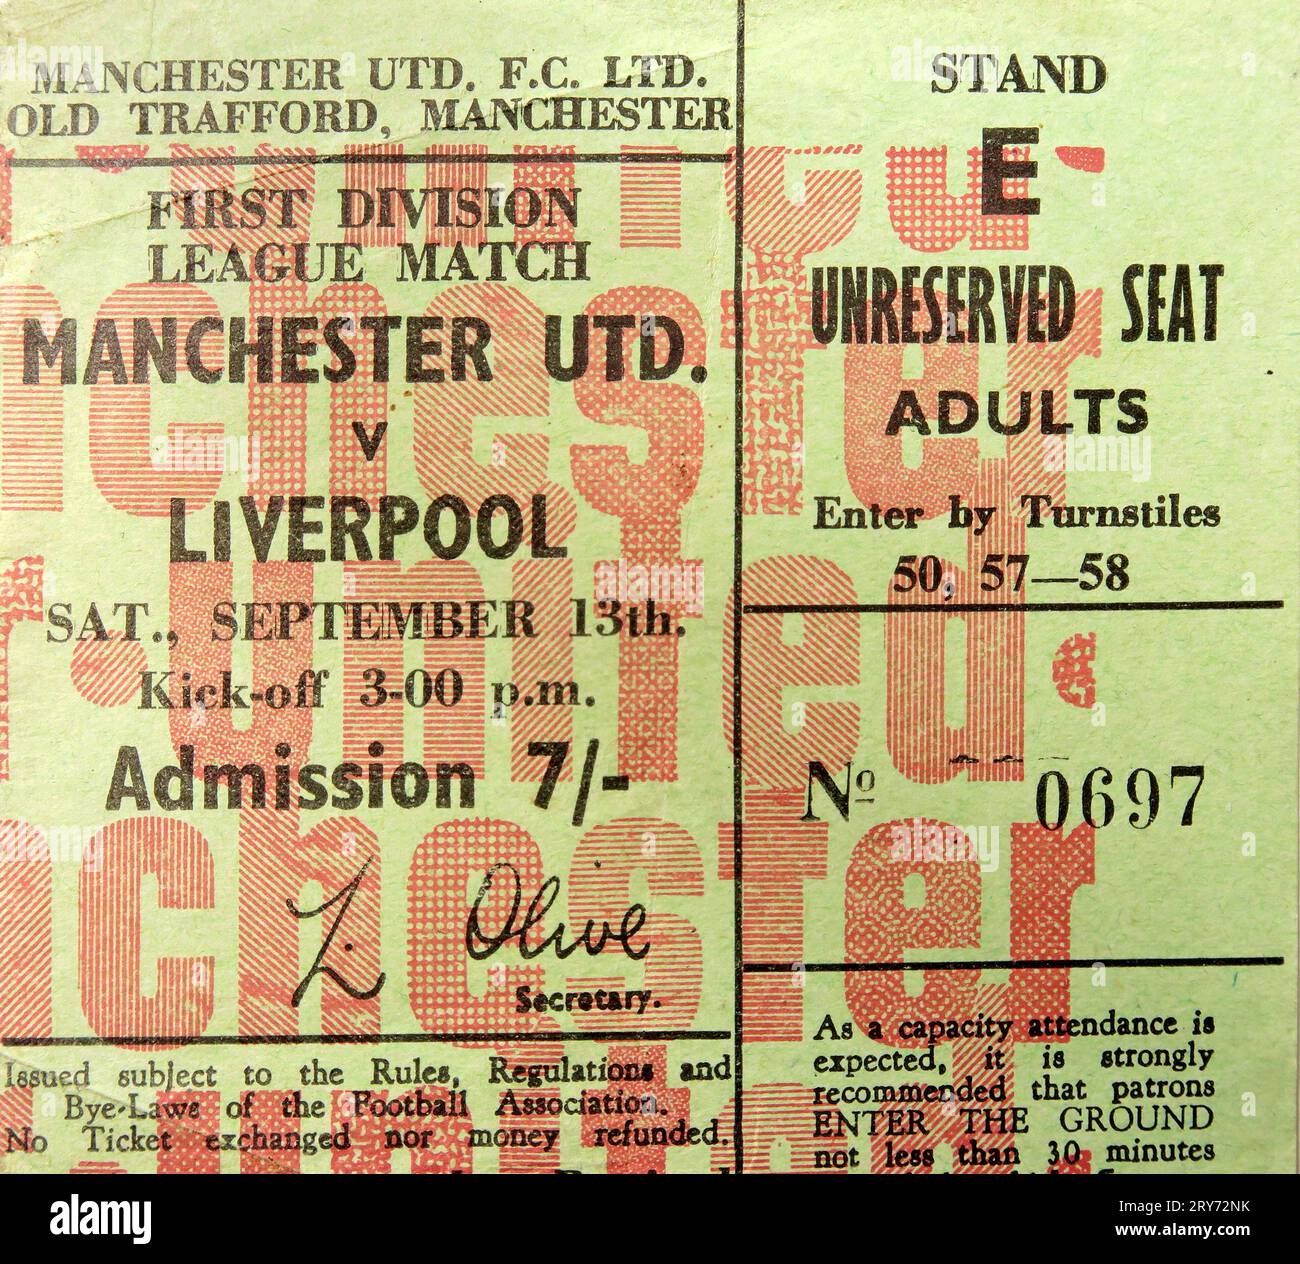 Manchester Unreserved Seating football ticket, MUFC v Liverpool LFC Saturday 13/09/1969 score was 1-0 - stubs, memorabilia Stock Photo